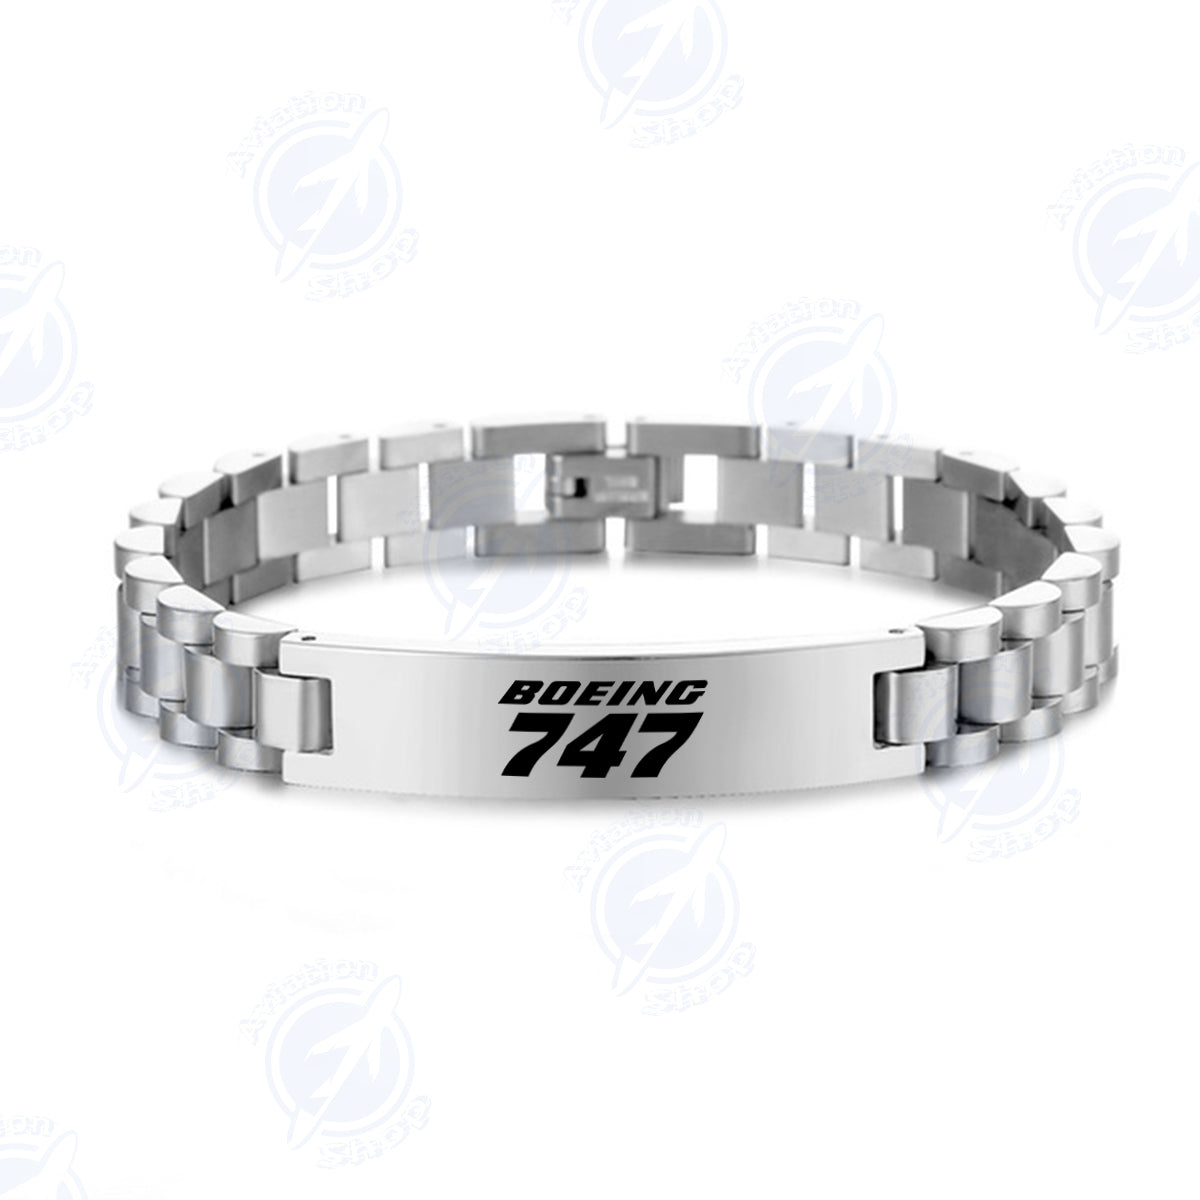 Boeing 747 & Text Designed Stainless Steel Chain Bracelets